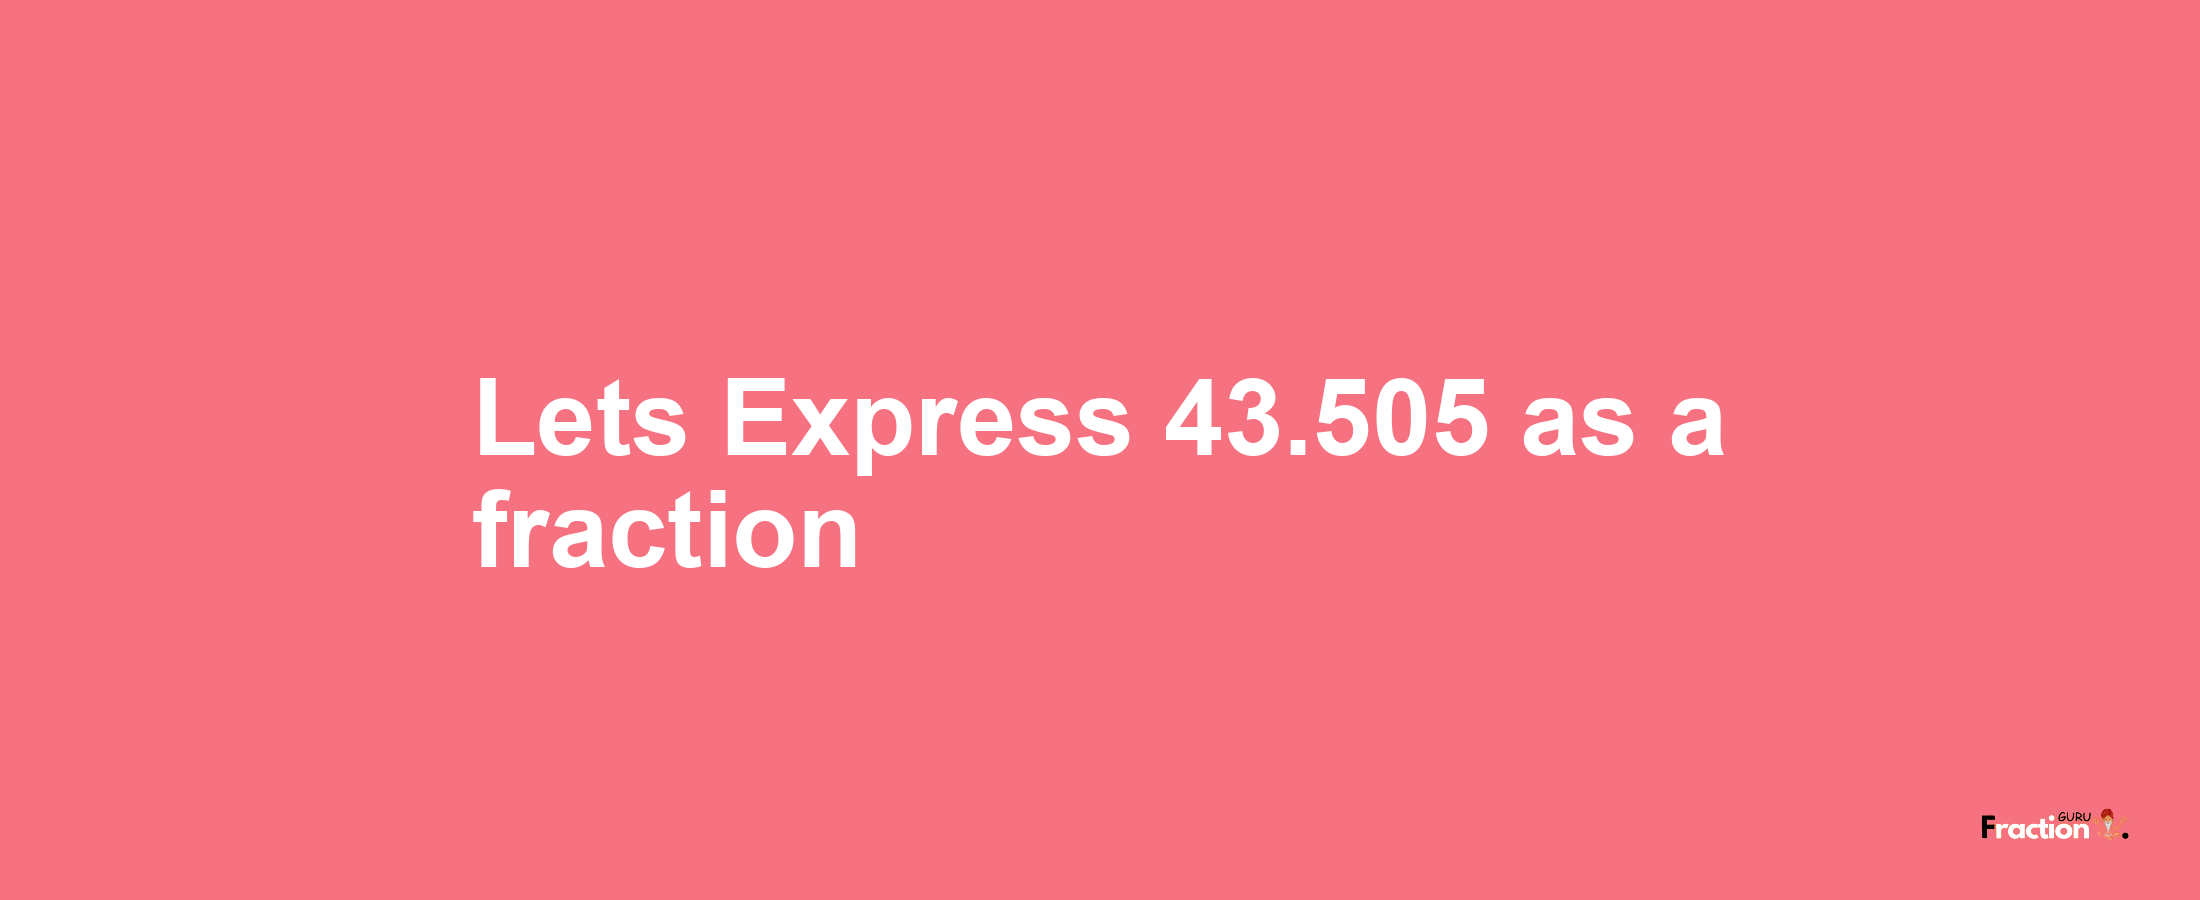 Lets Express 43.505 as afraction